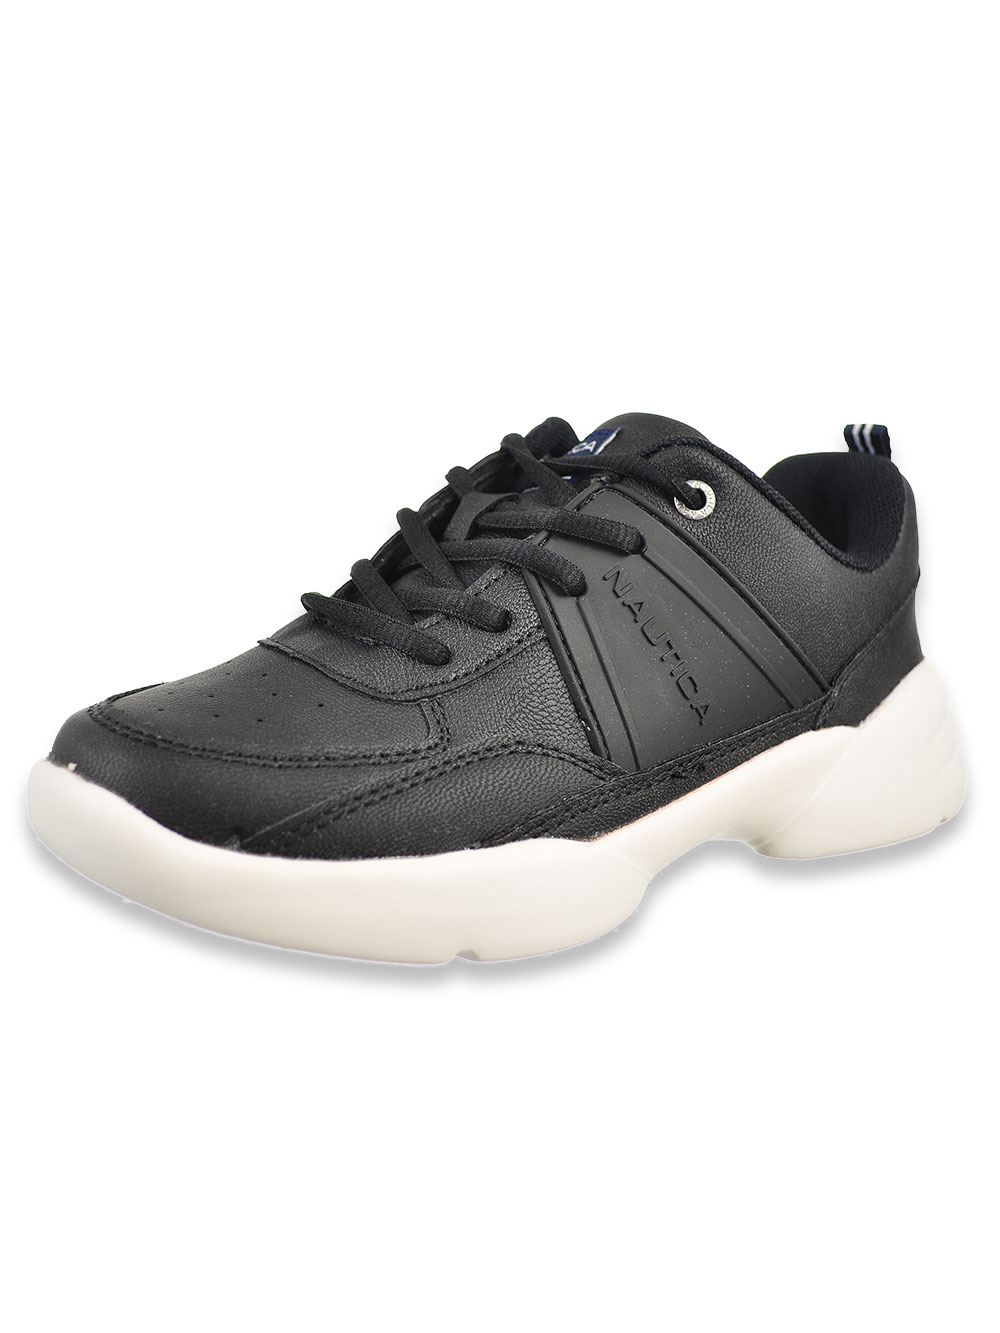 Boys' Park Slope Sneakers by Nautica in 